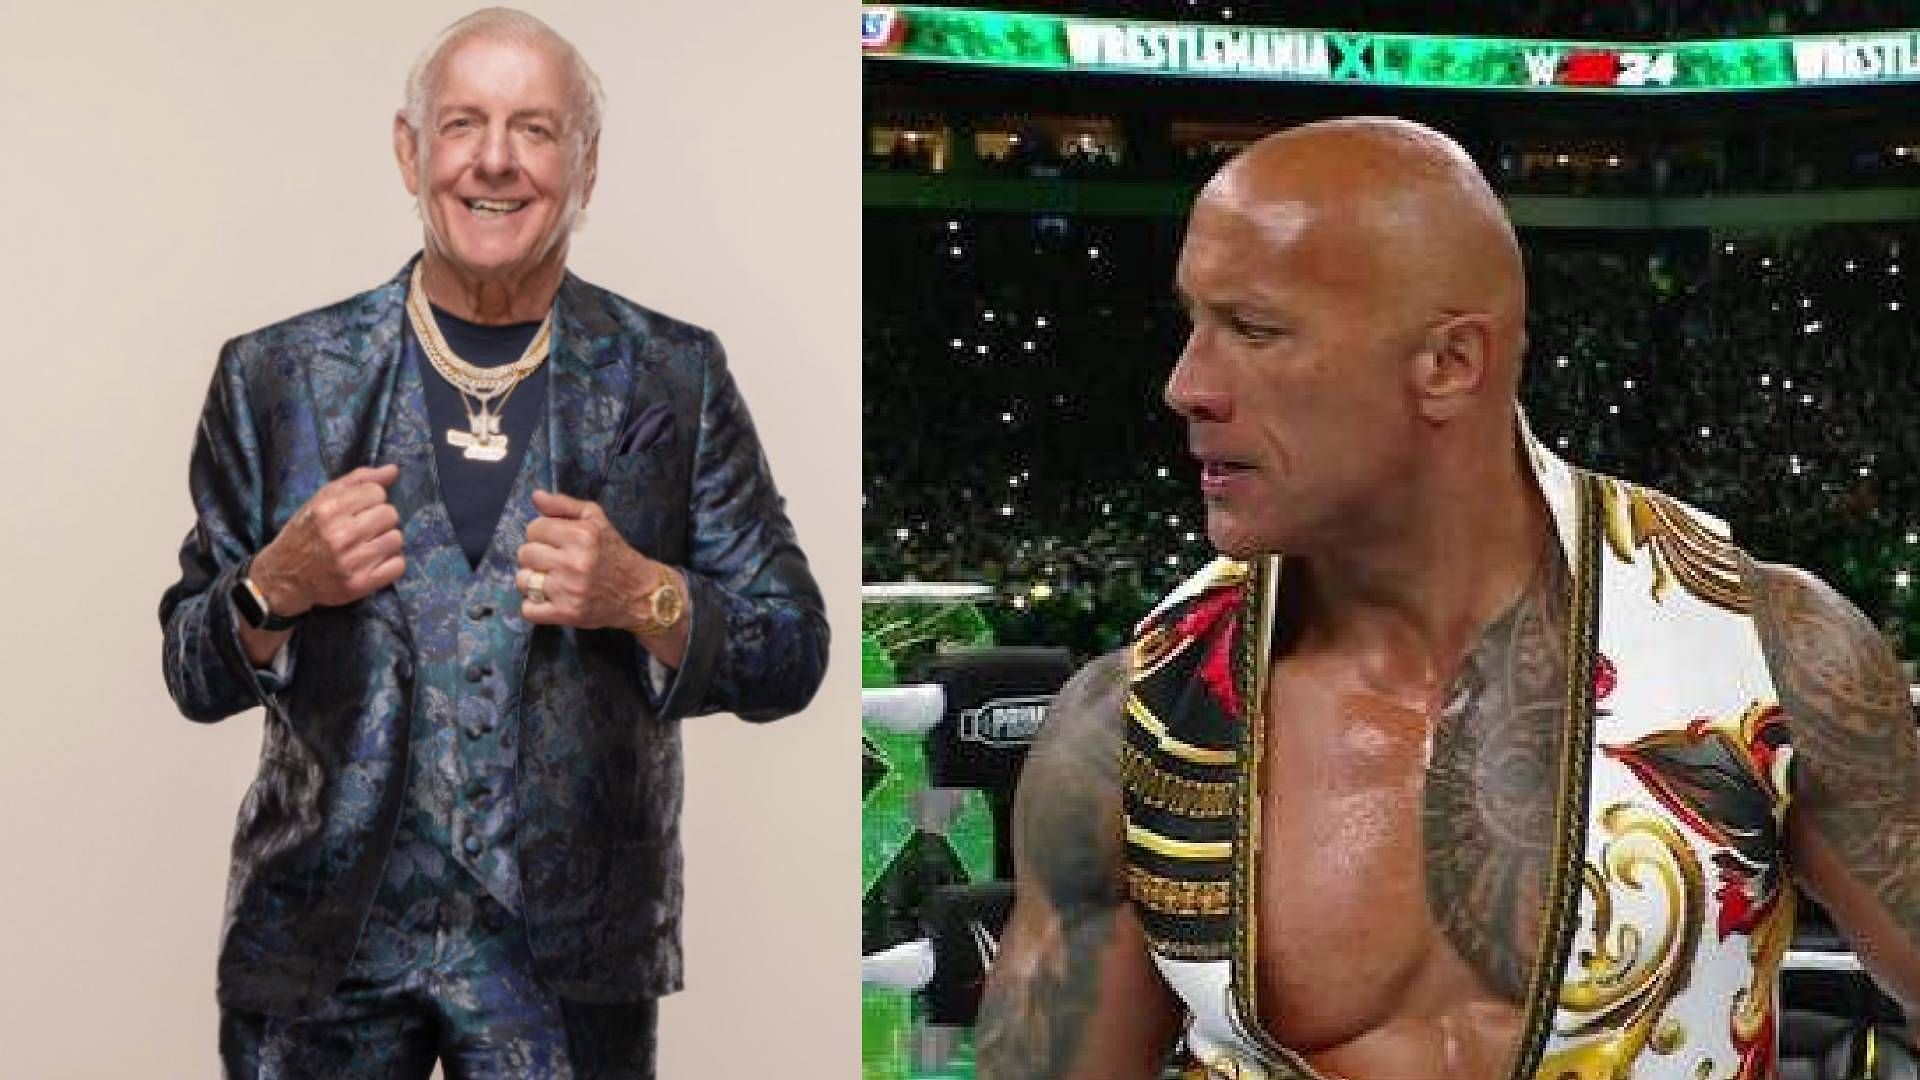 Ric Flair and The Rock